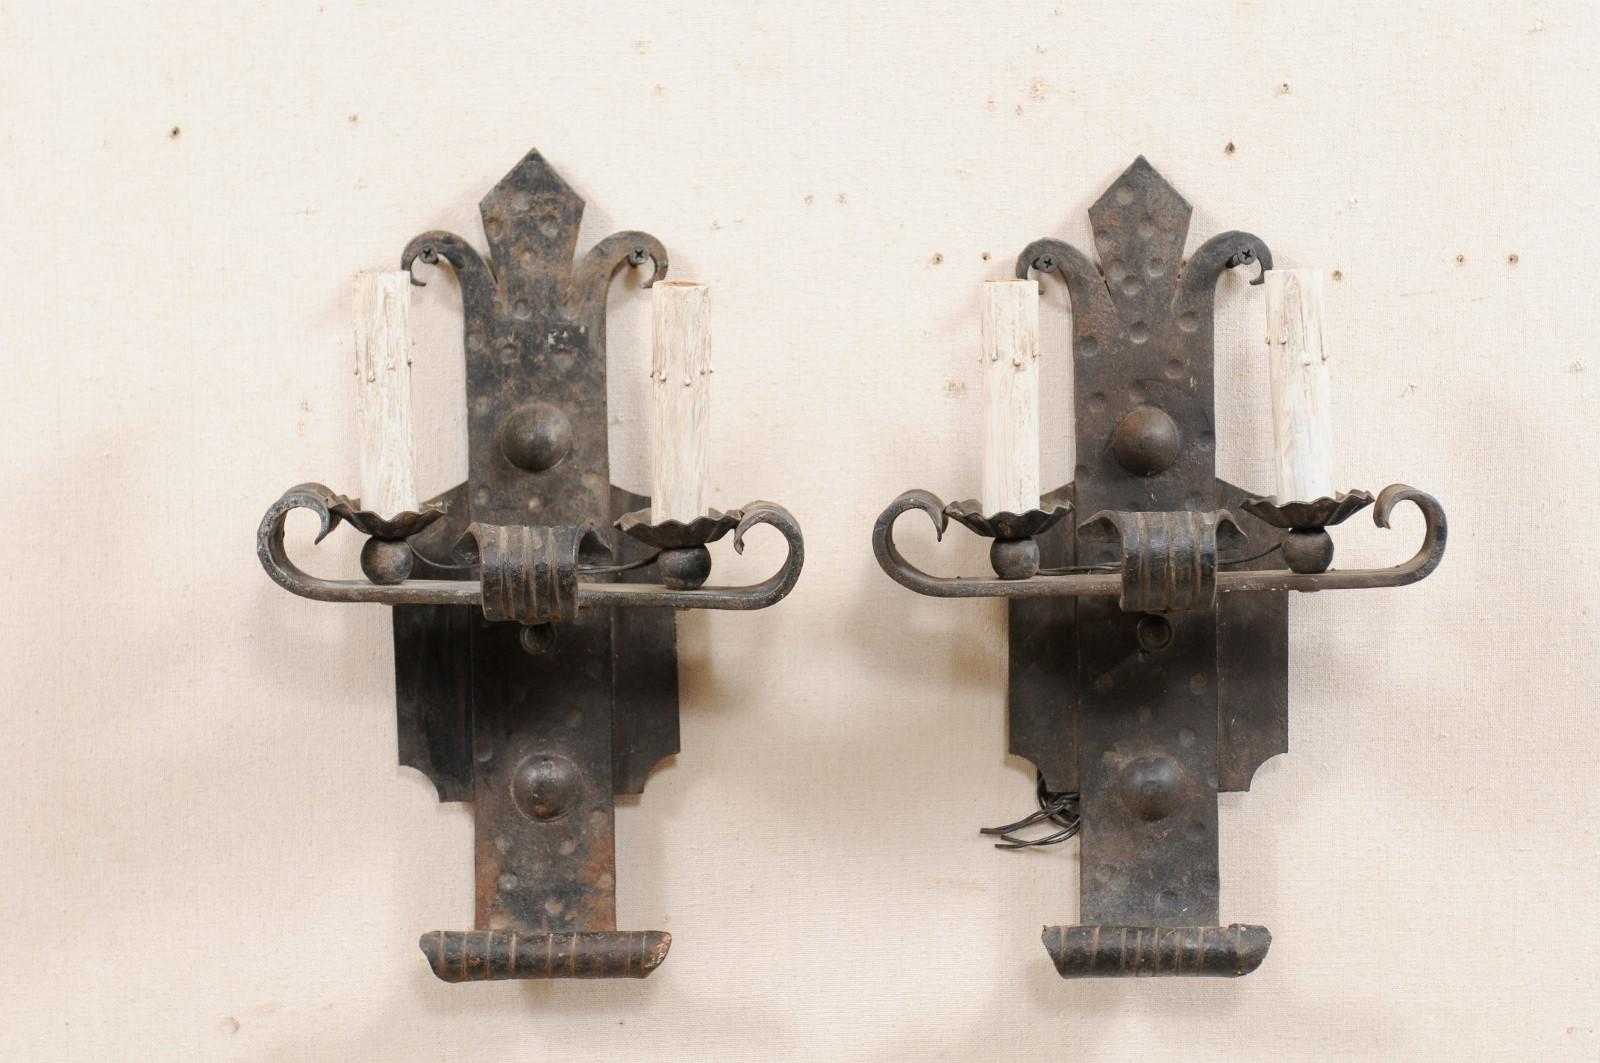 A pair of French two-light sconces from the mid-20th century. These vintage French hand-forged sconces each feature a horizontally placed bar, with upwardly scrolled ends, providing support to the two ruffled iron bobeches with painted candle